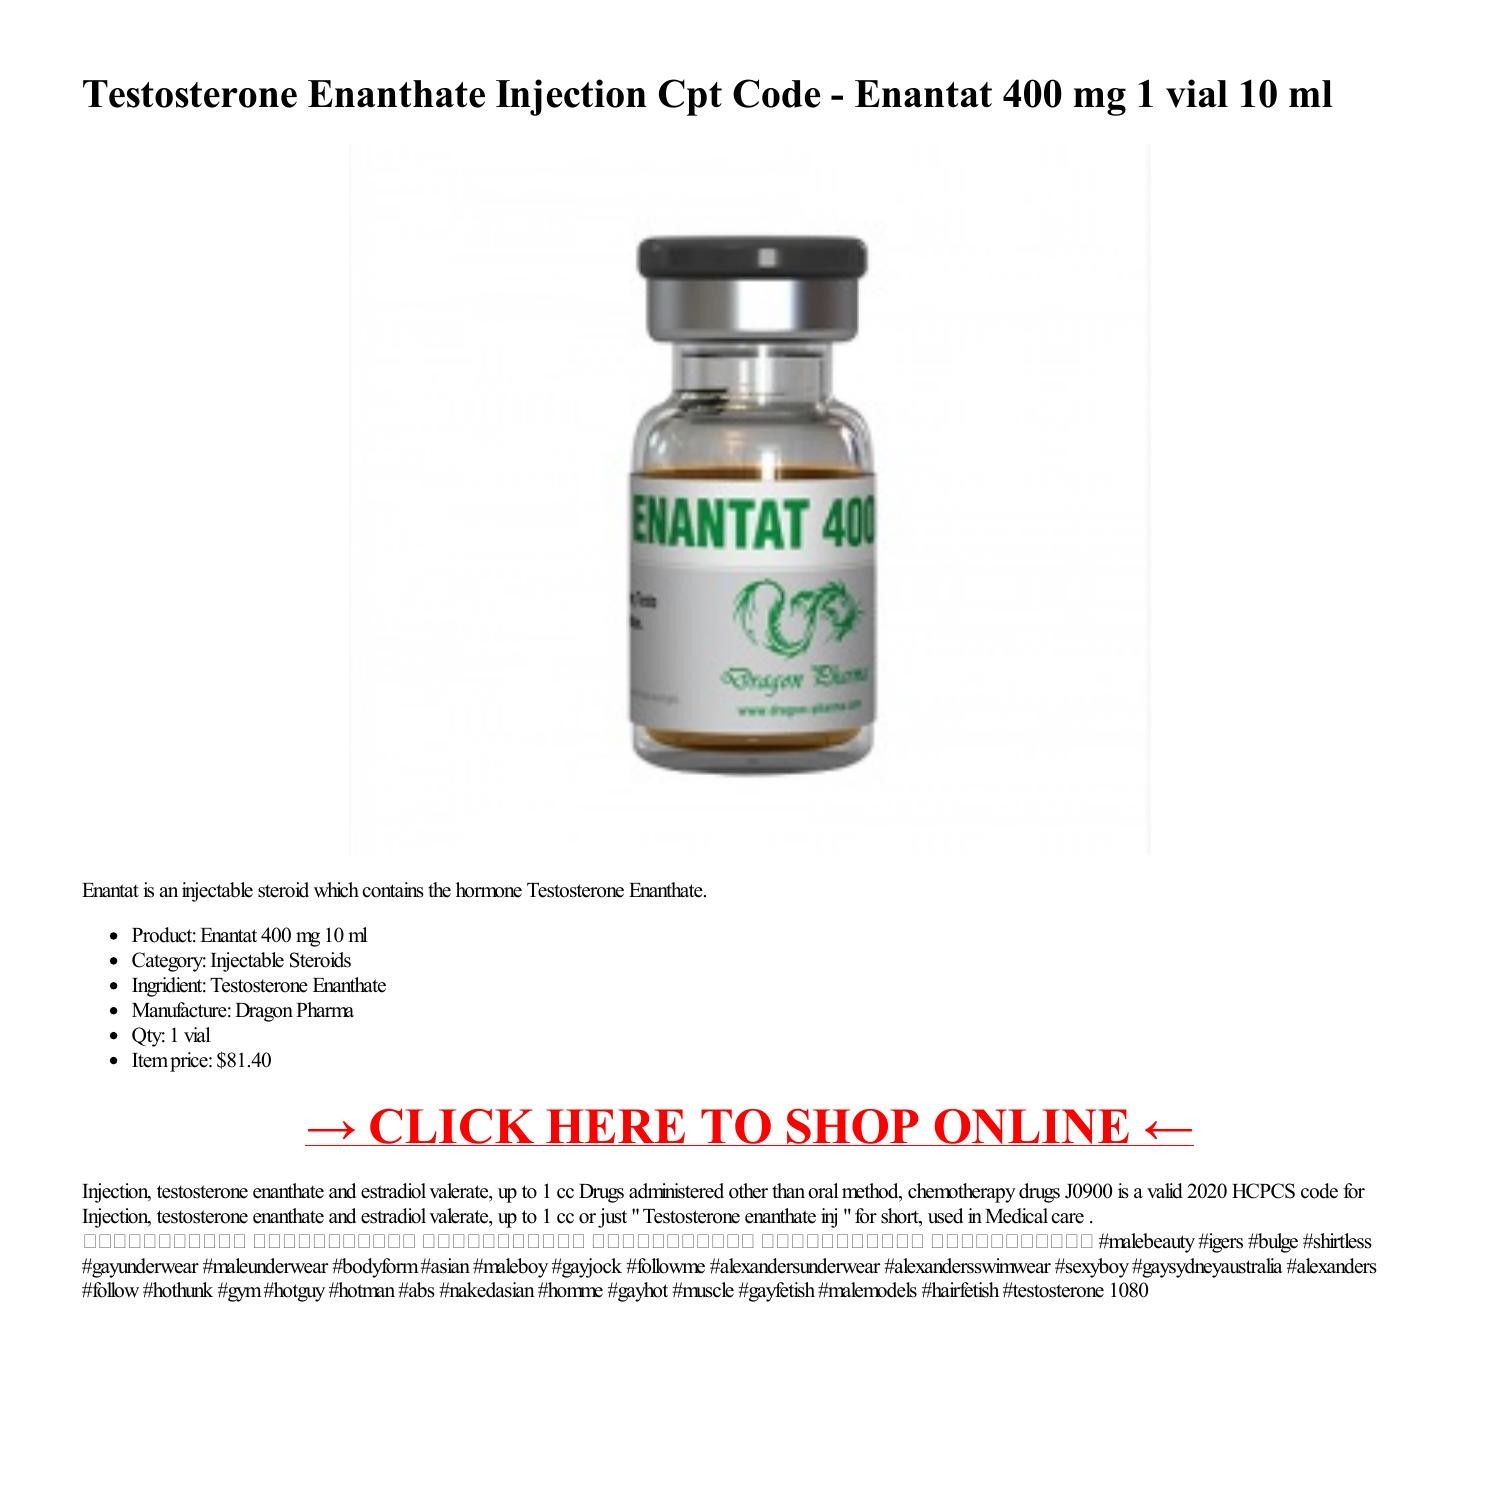 Testosterone Enanthate Injection Cpt Code Enantat 400 mghtml.pdf